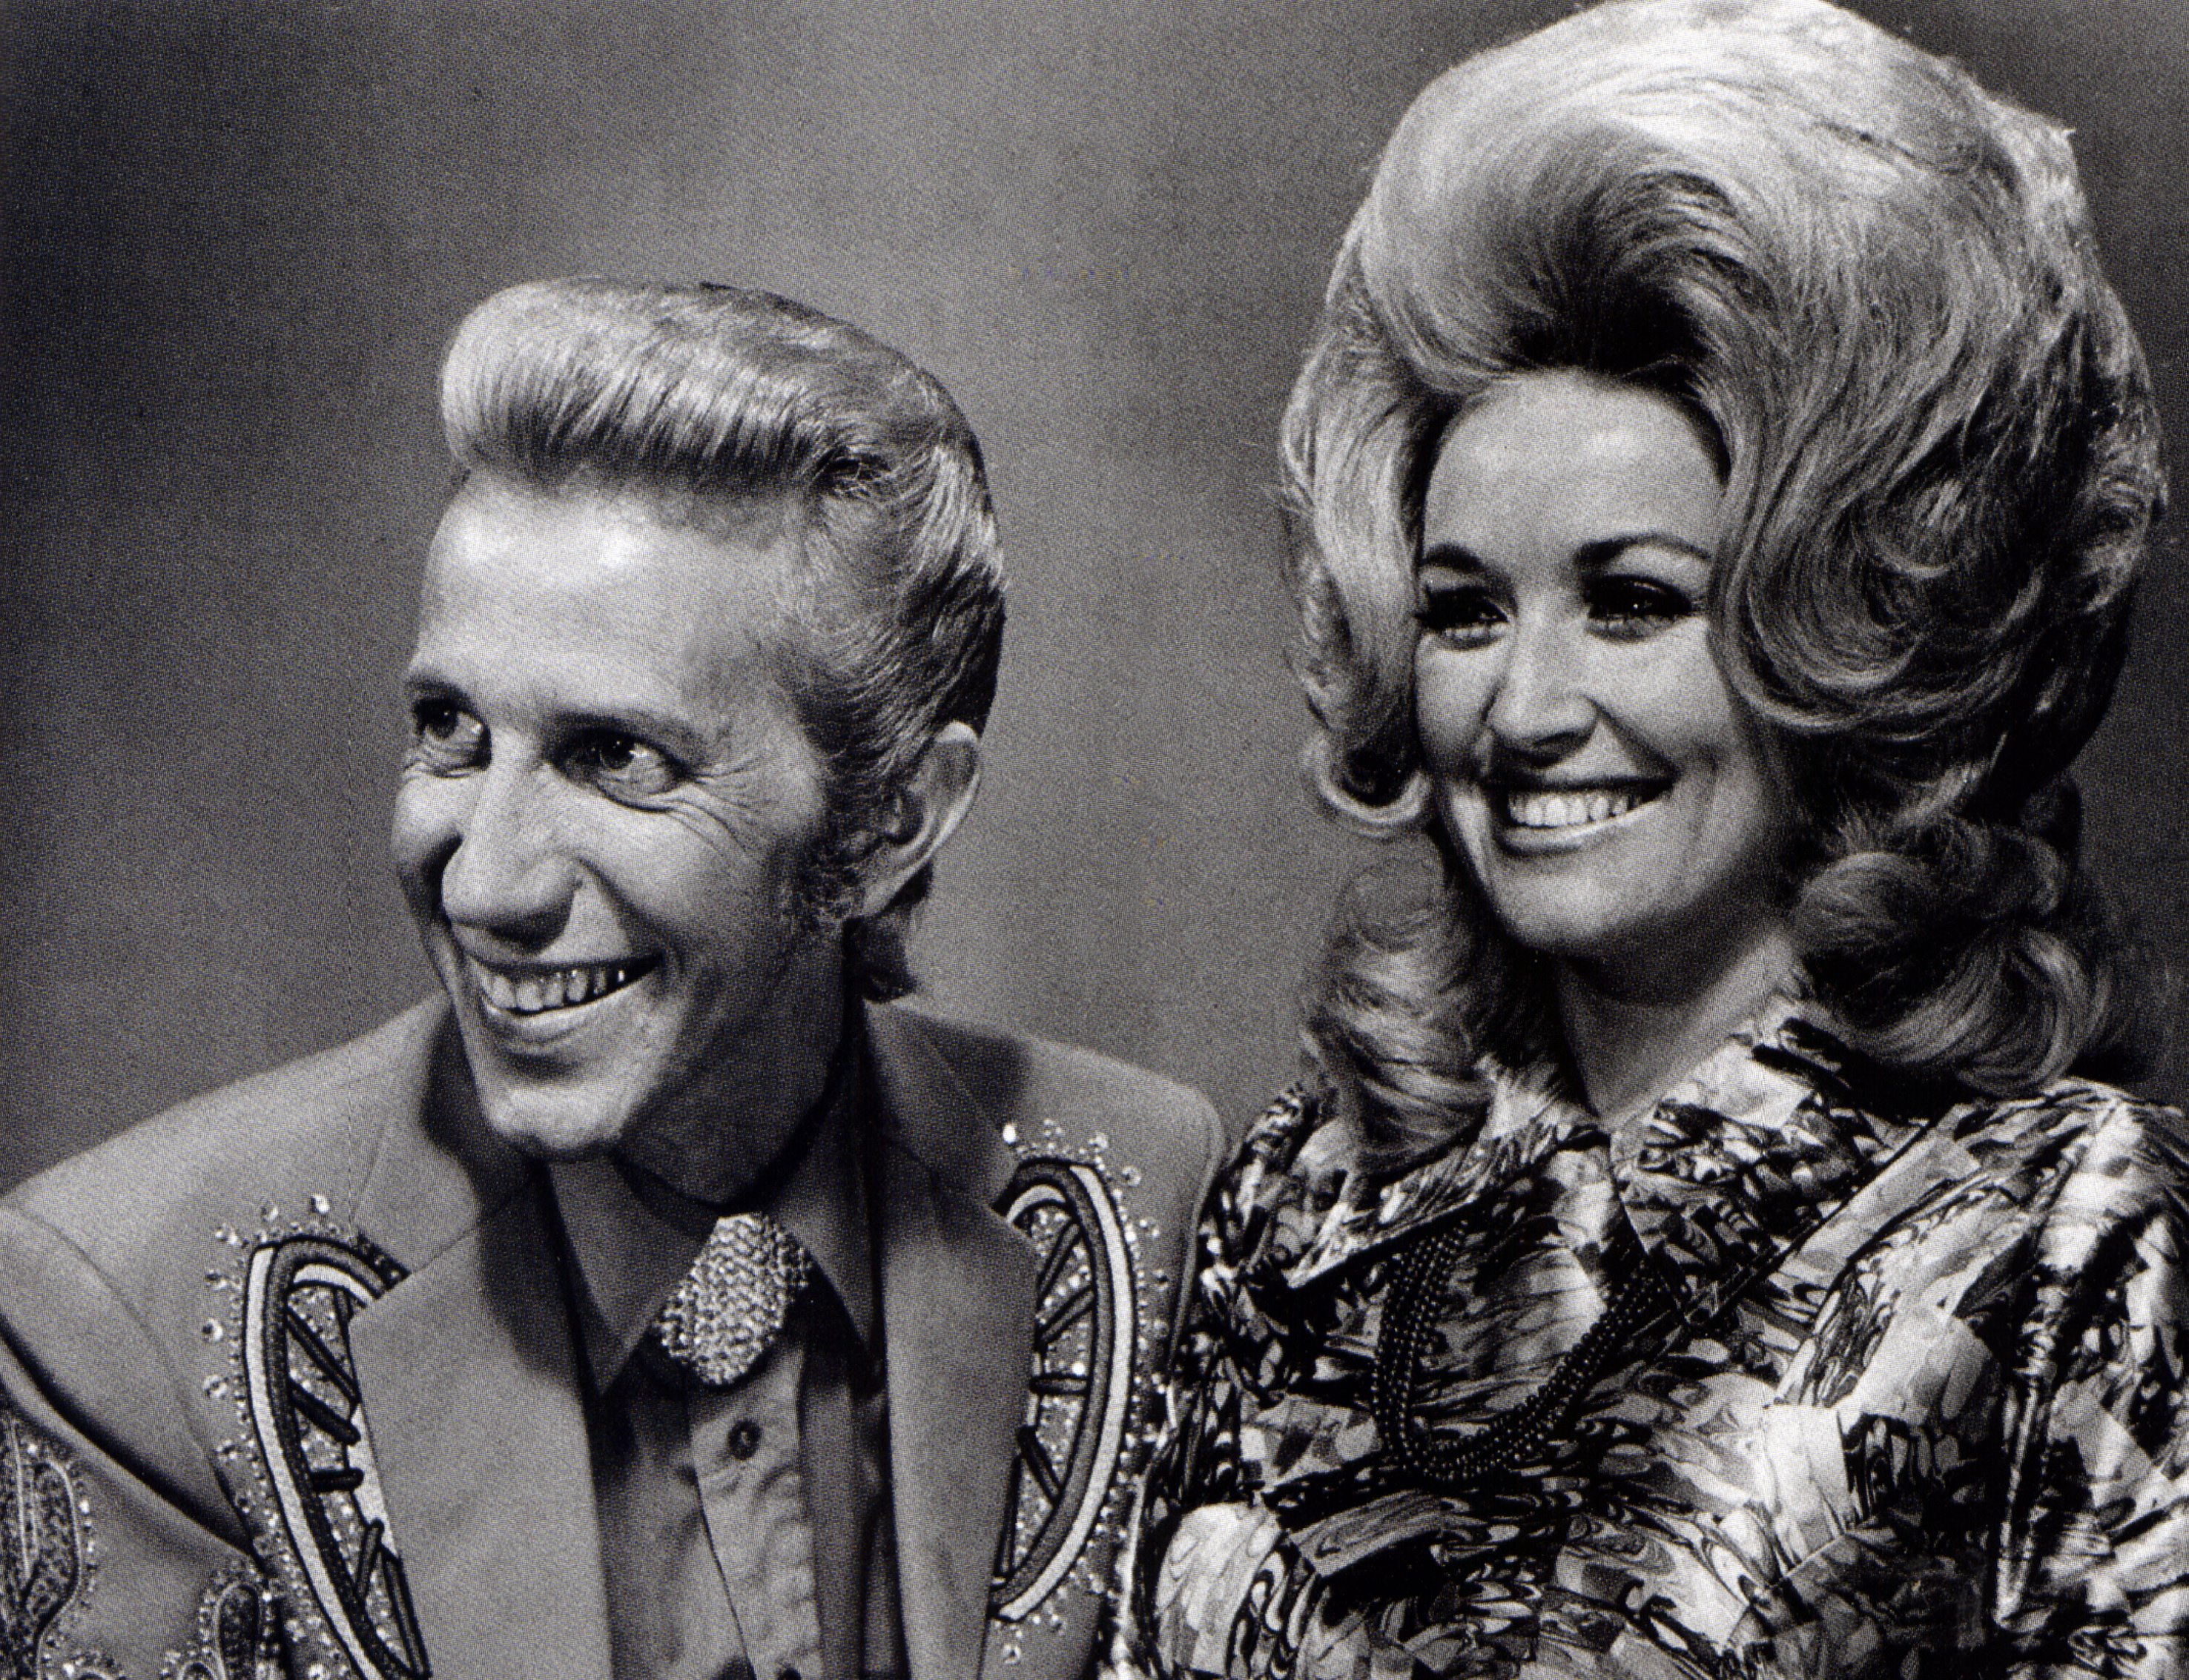 Dolly Parton and Porter Wagoner pose together, smiling, in a black and white photo.